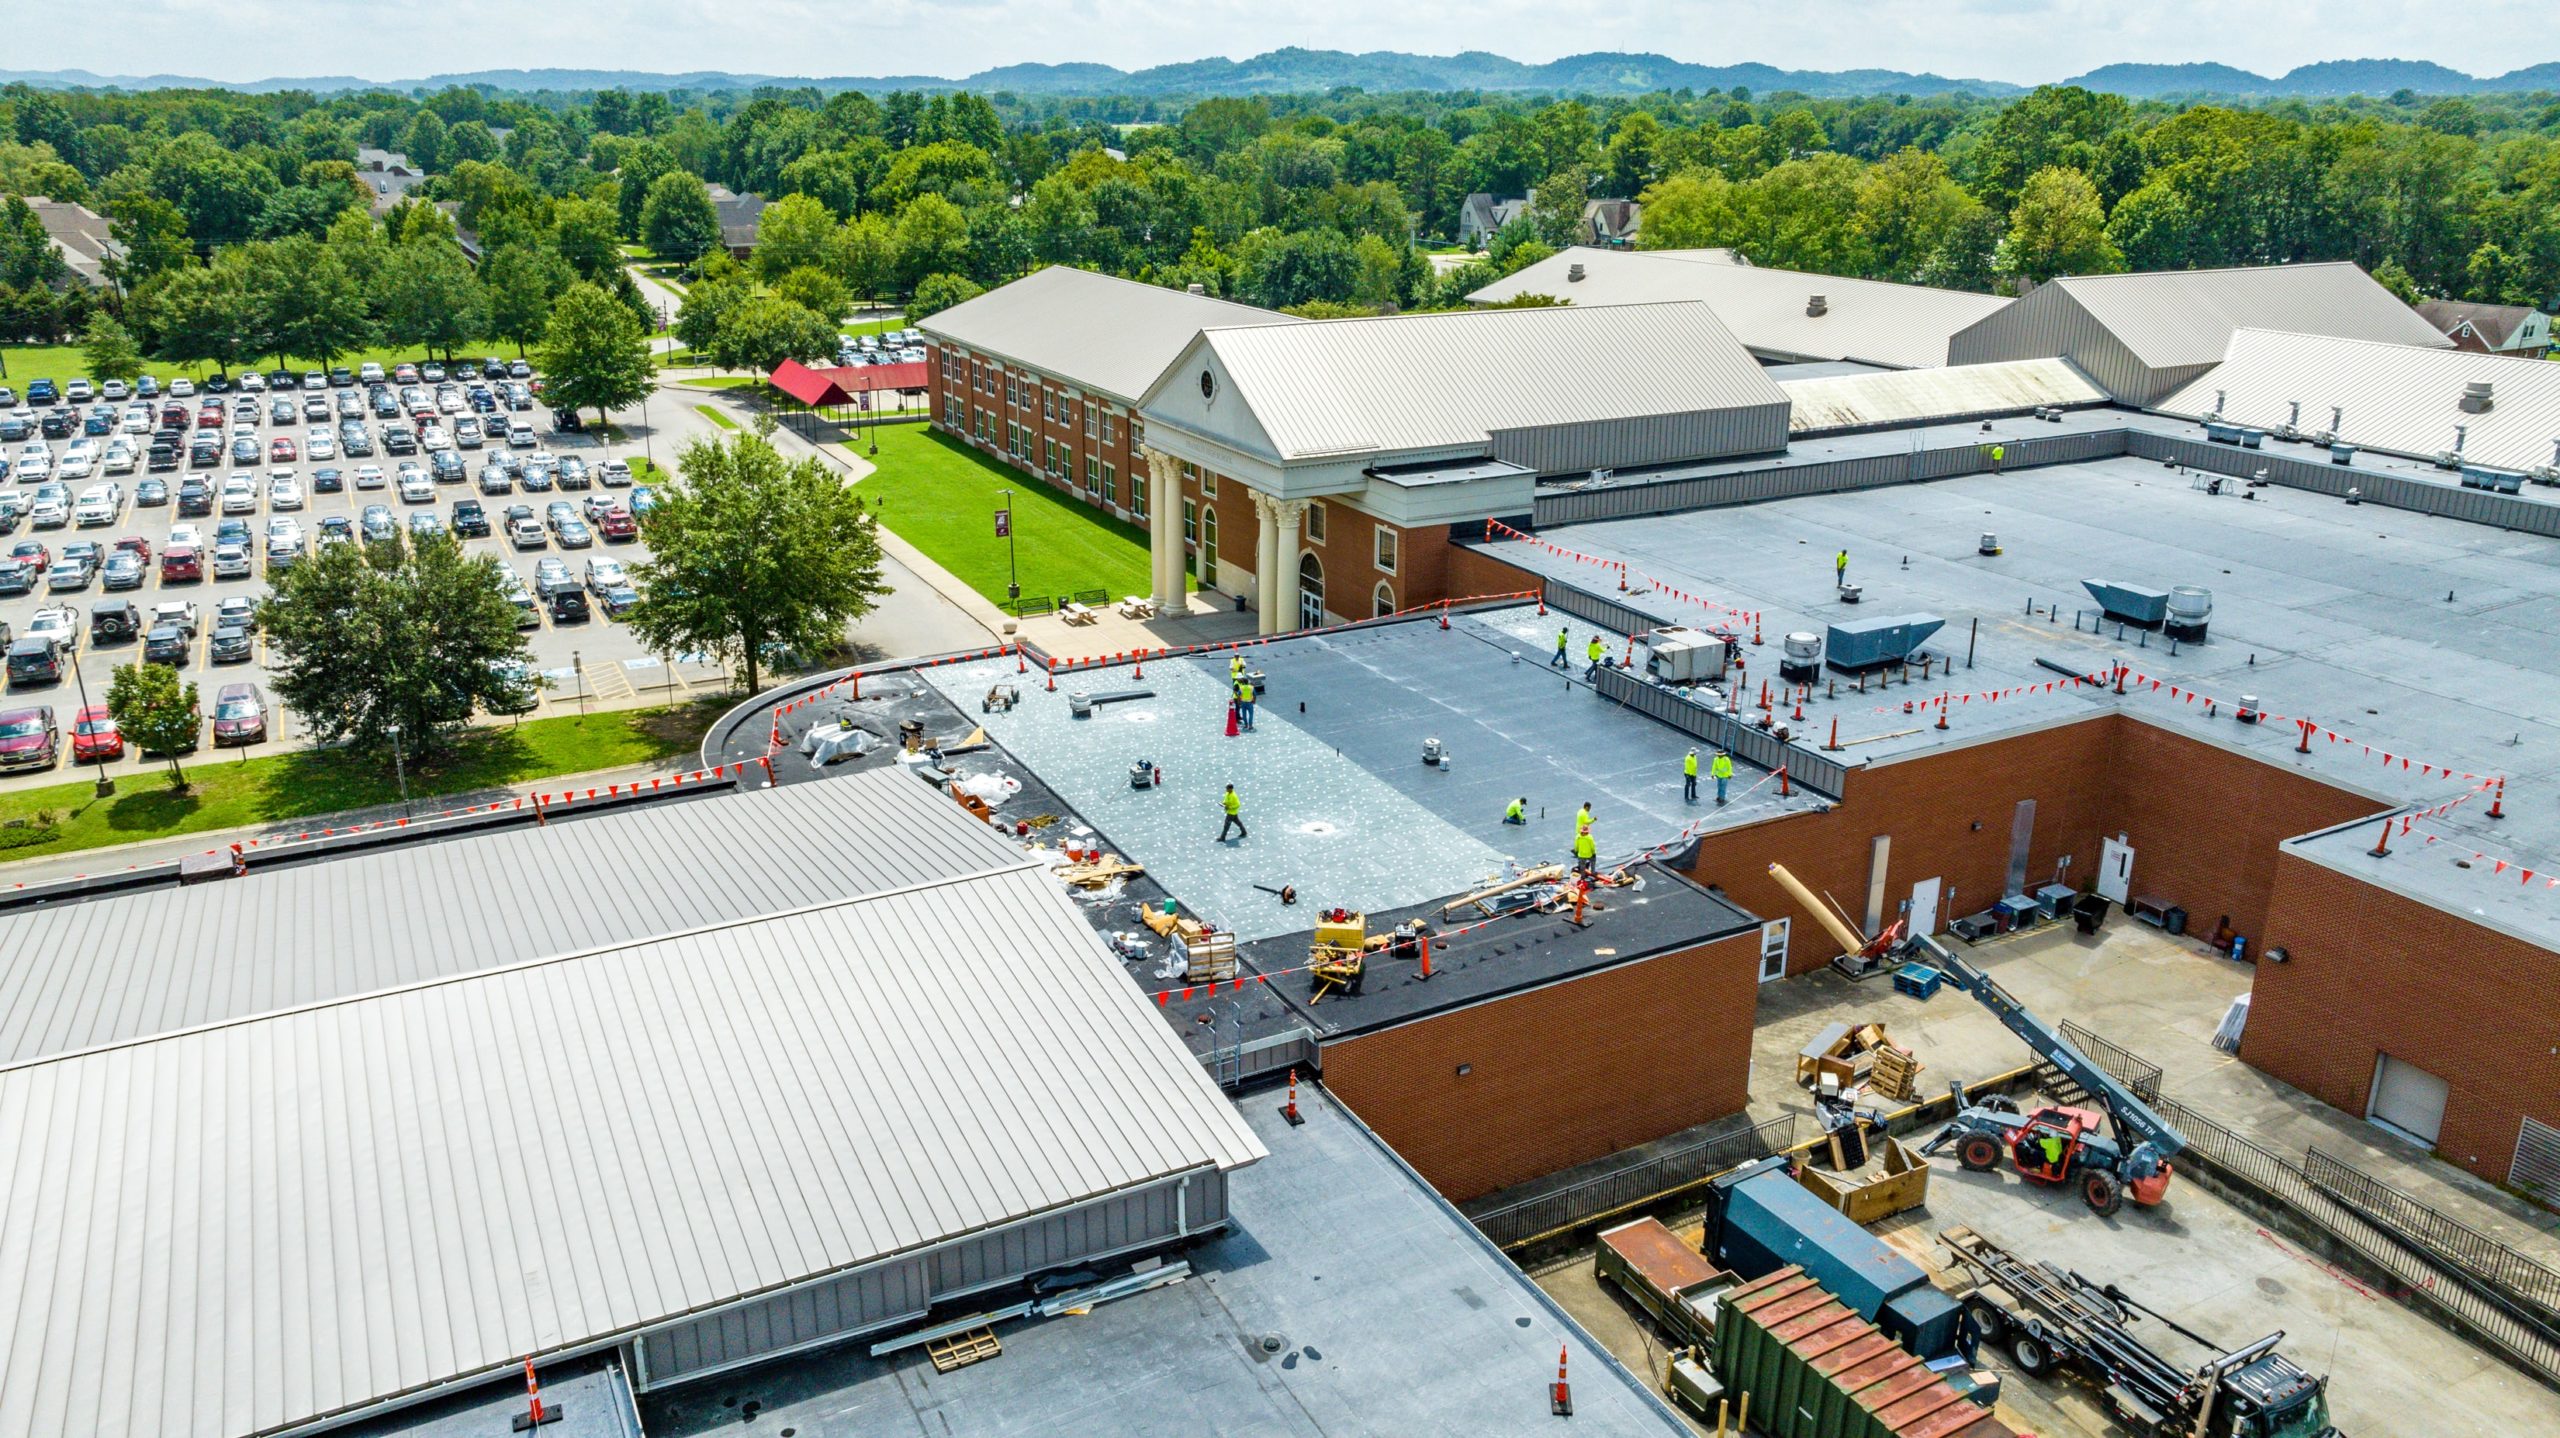 aerial view of a commercial roof on a sunny day.